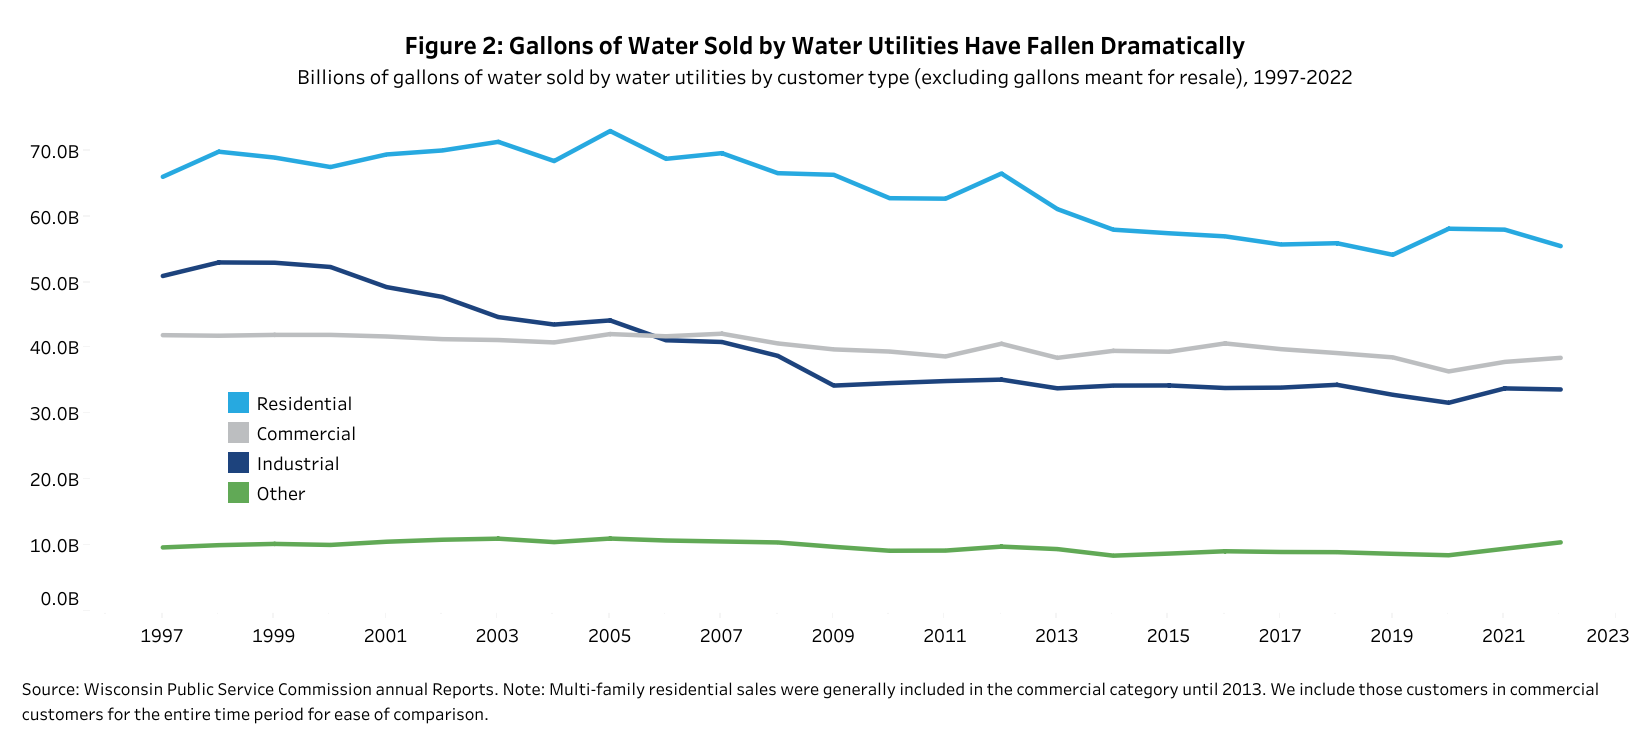 This graphic shows how water consumption has changed over time based on consumer